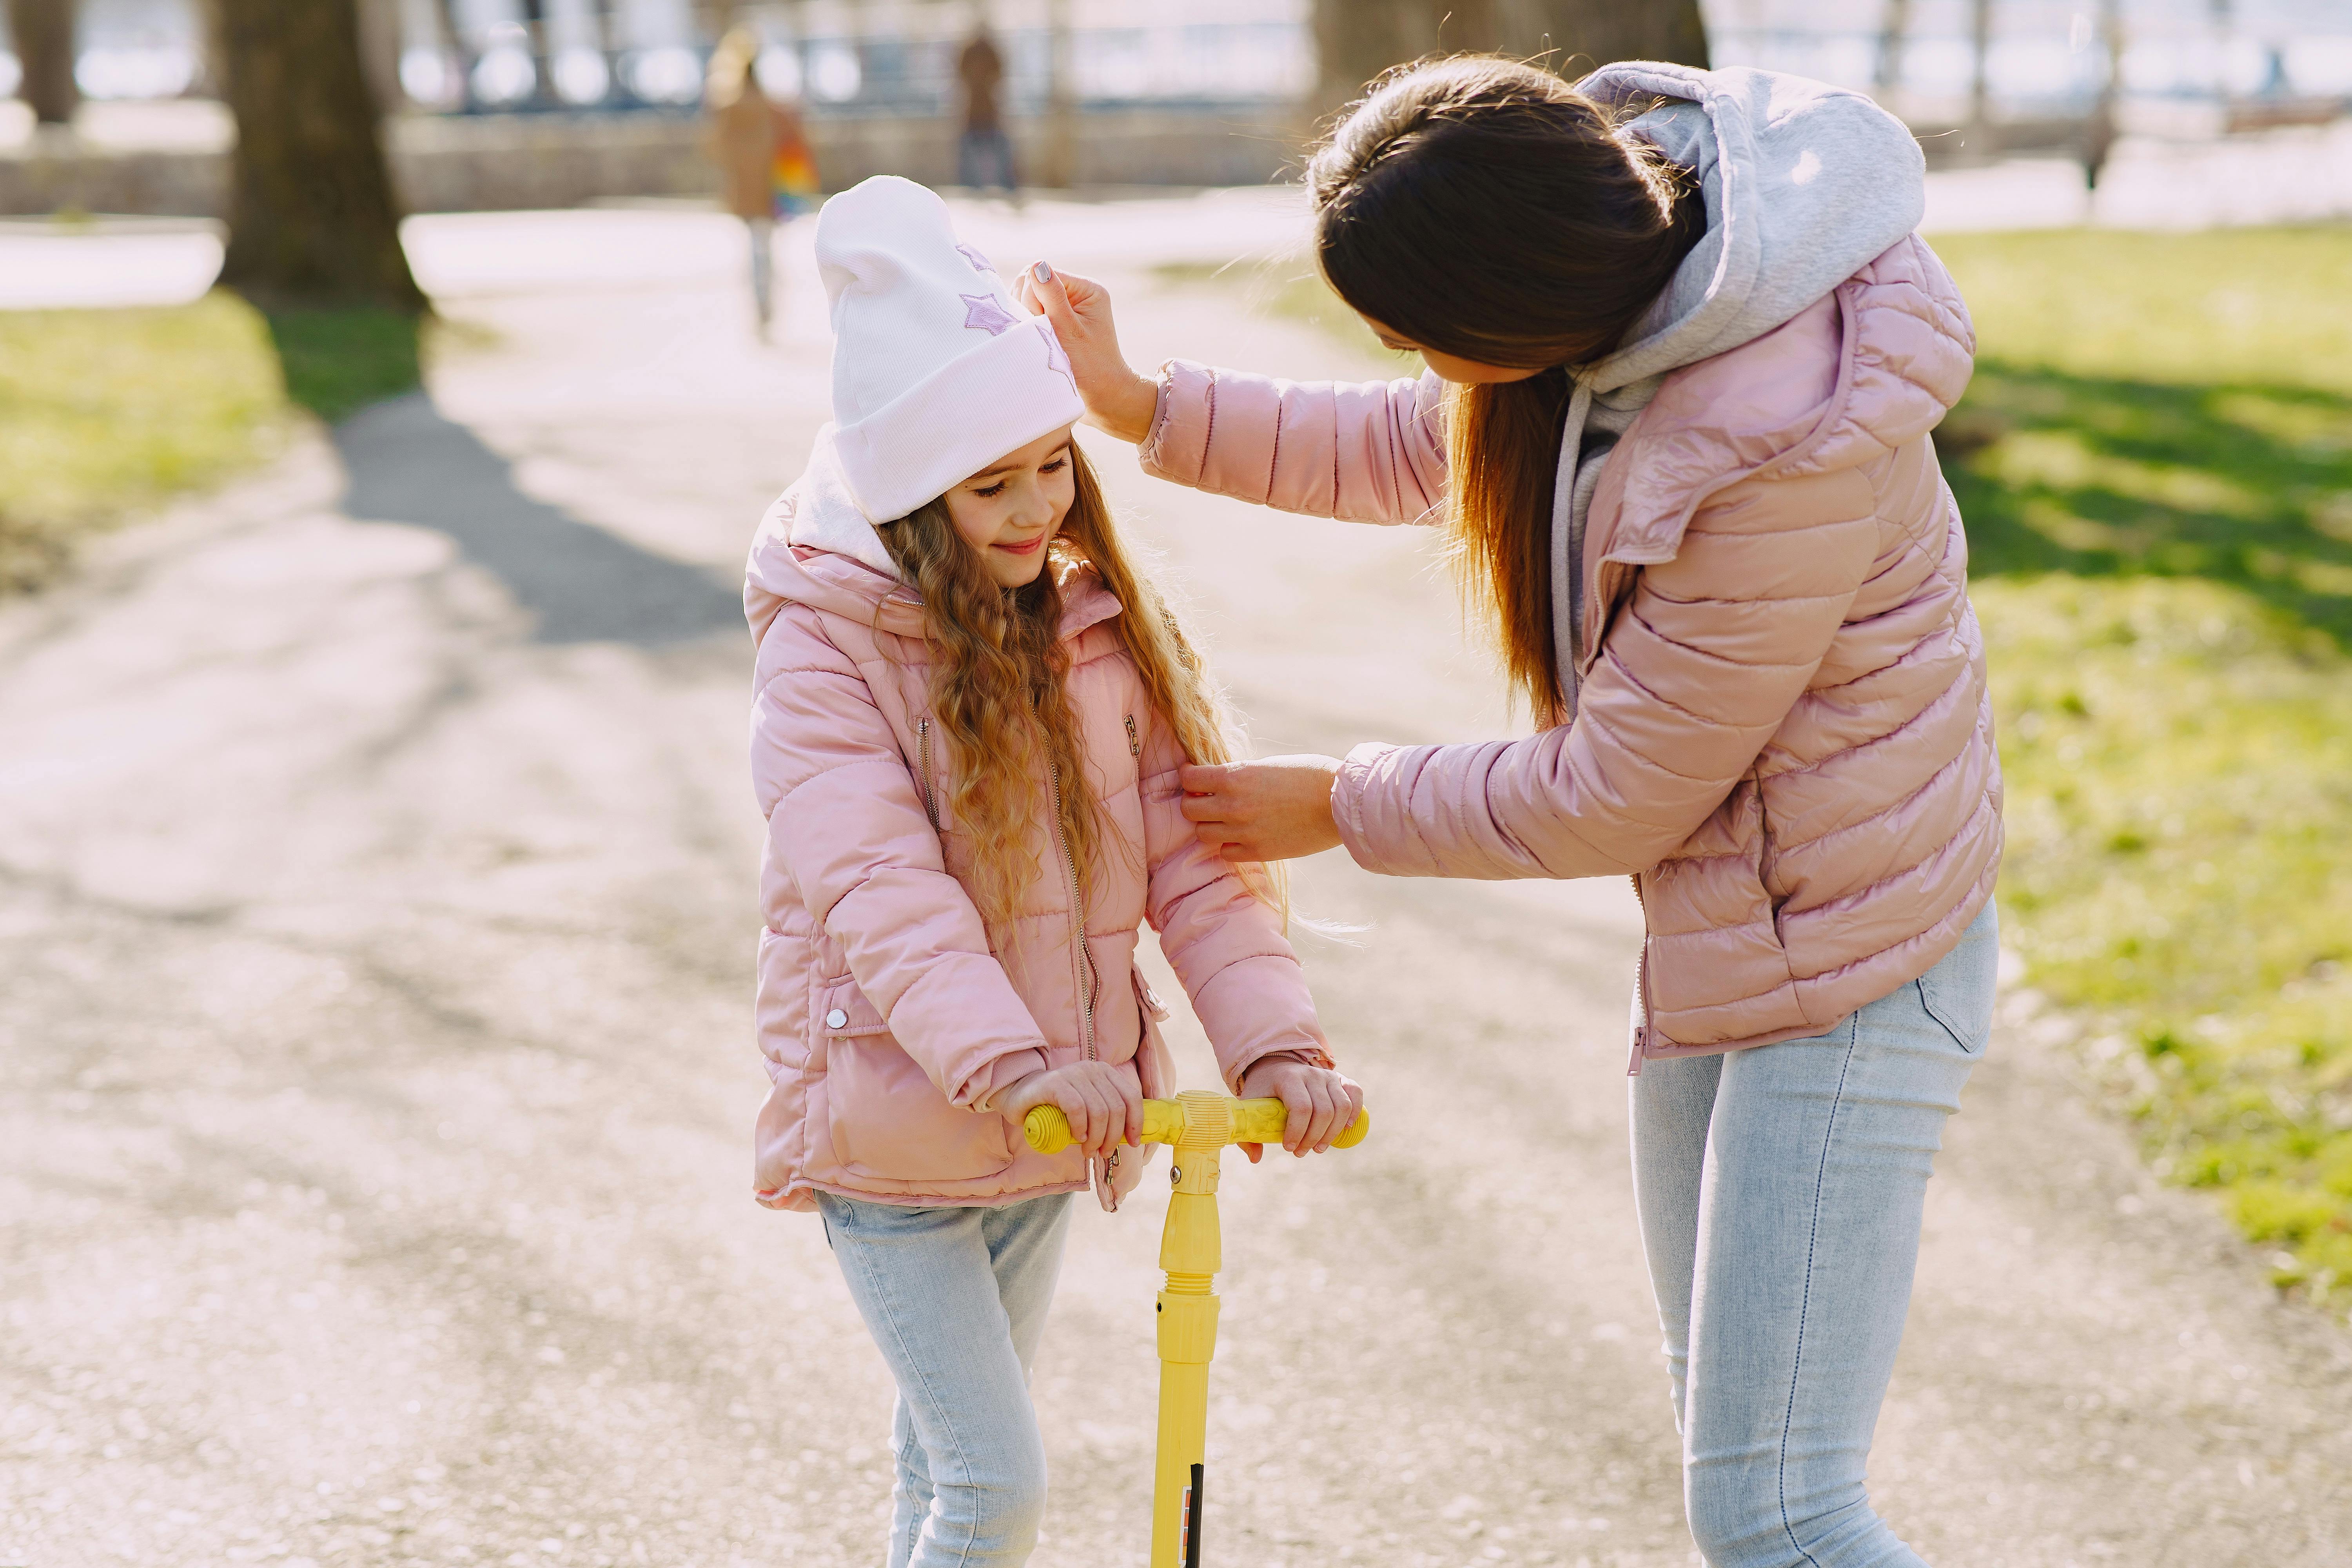 Mom and daughter spending time in the park | Source: Pexels